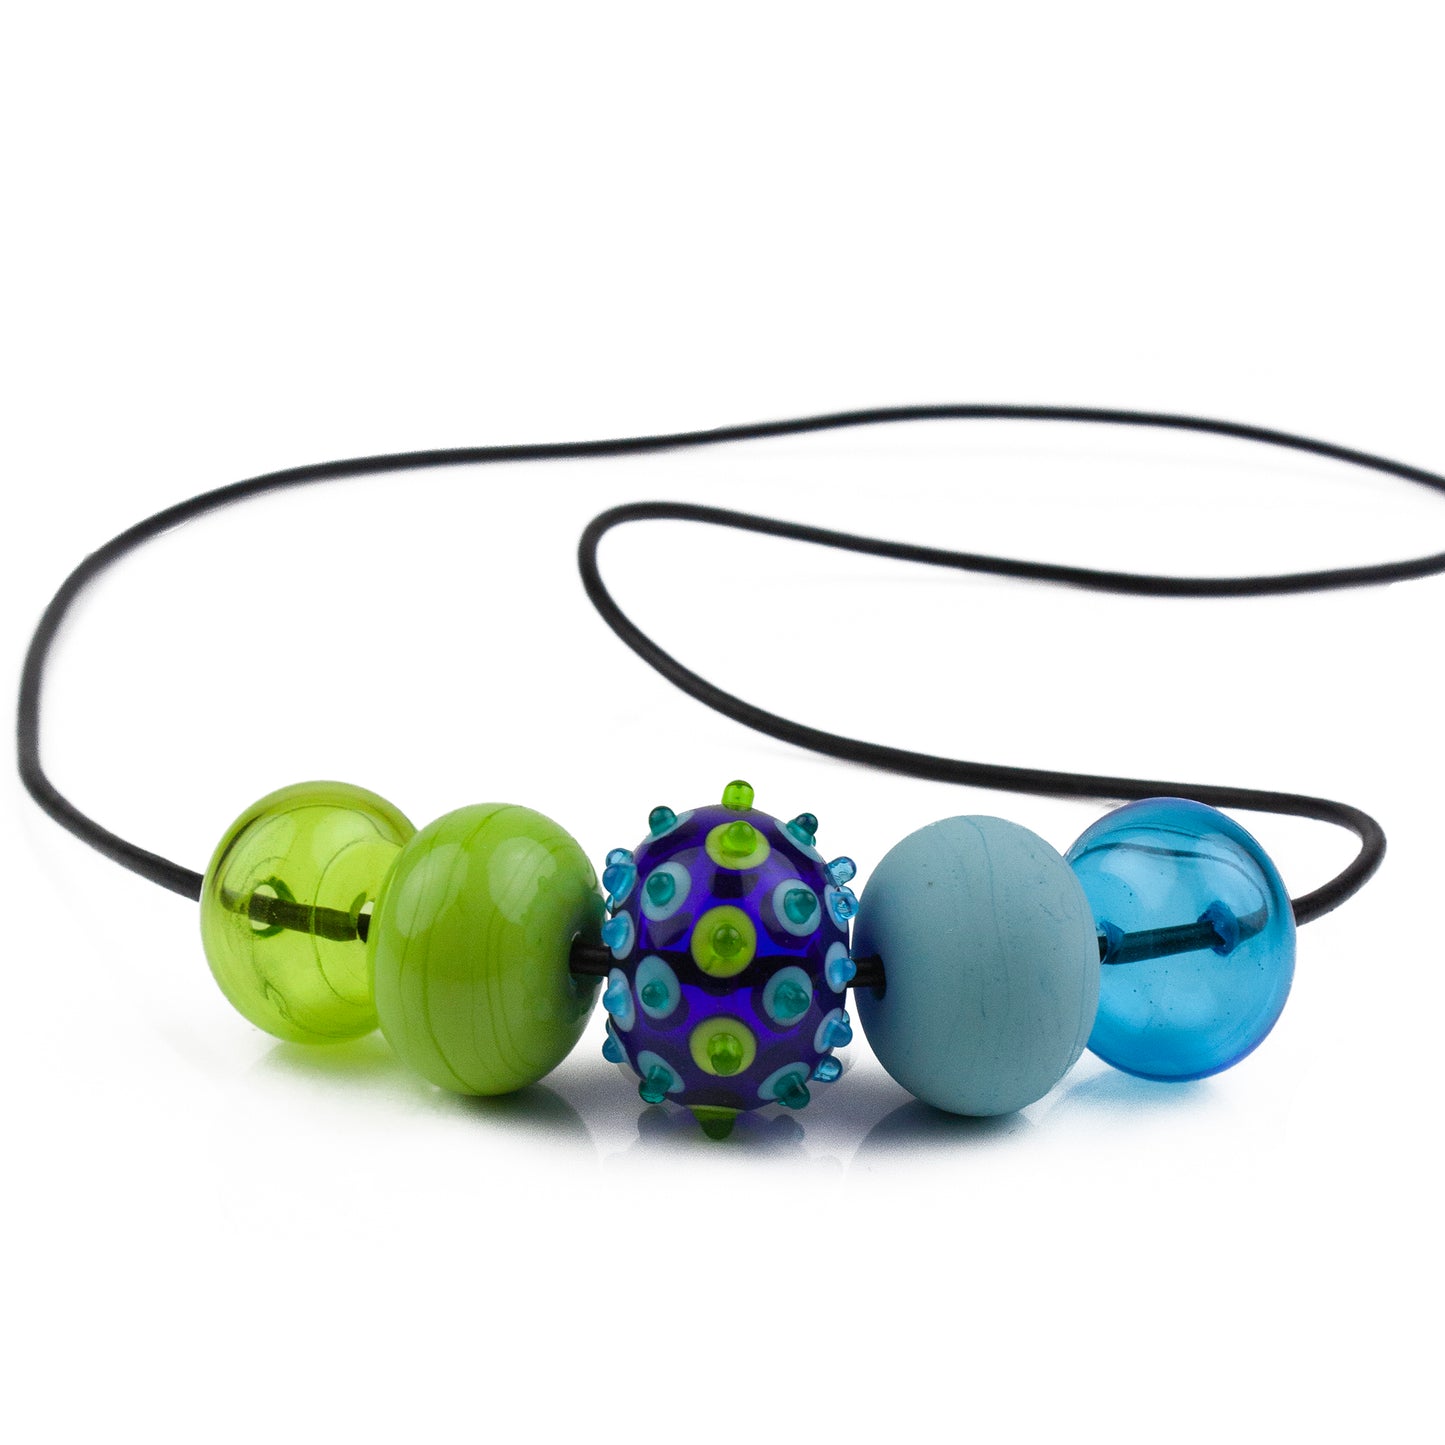 5 bubble bead necklace - blue and green with focal bead